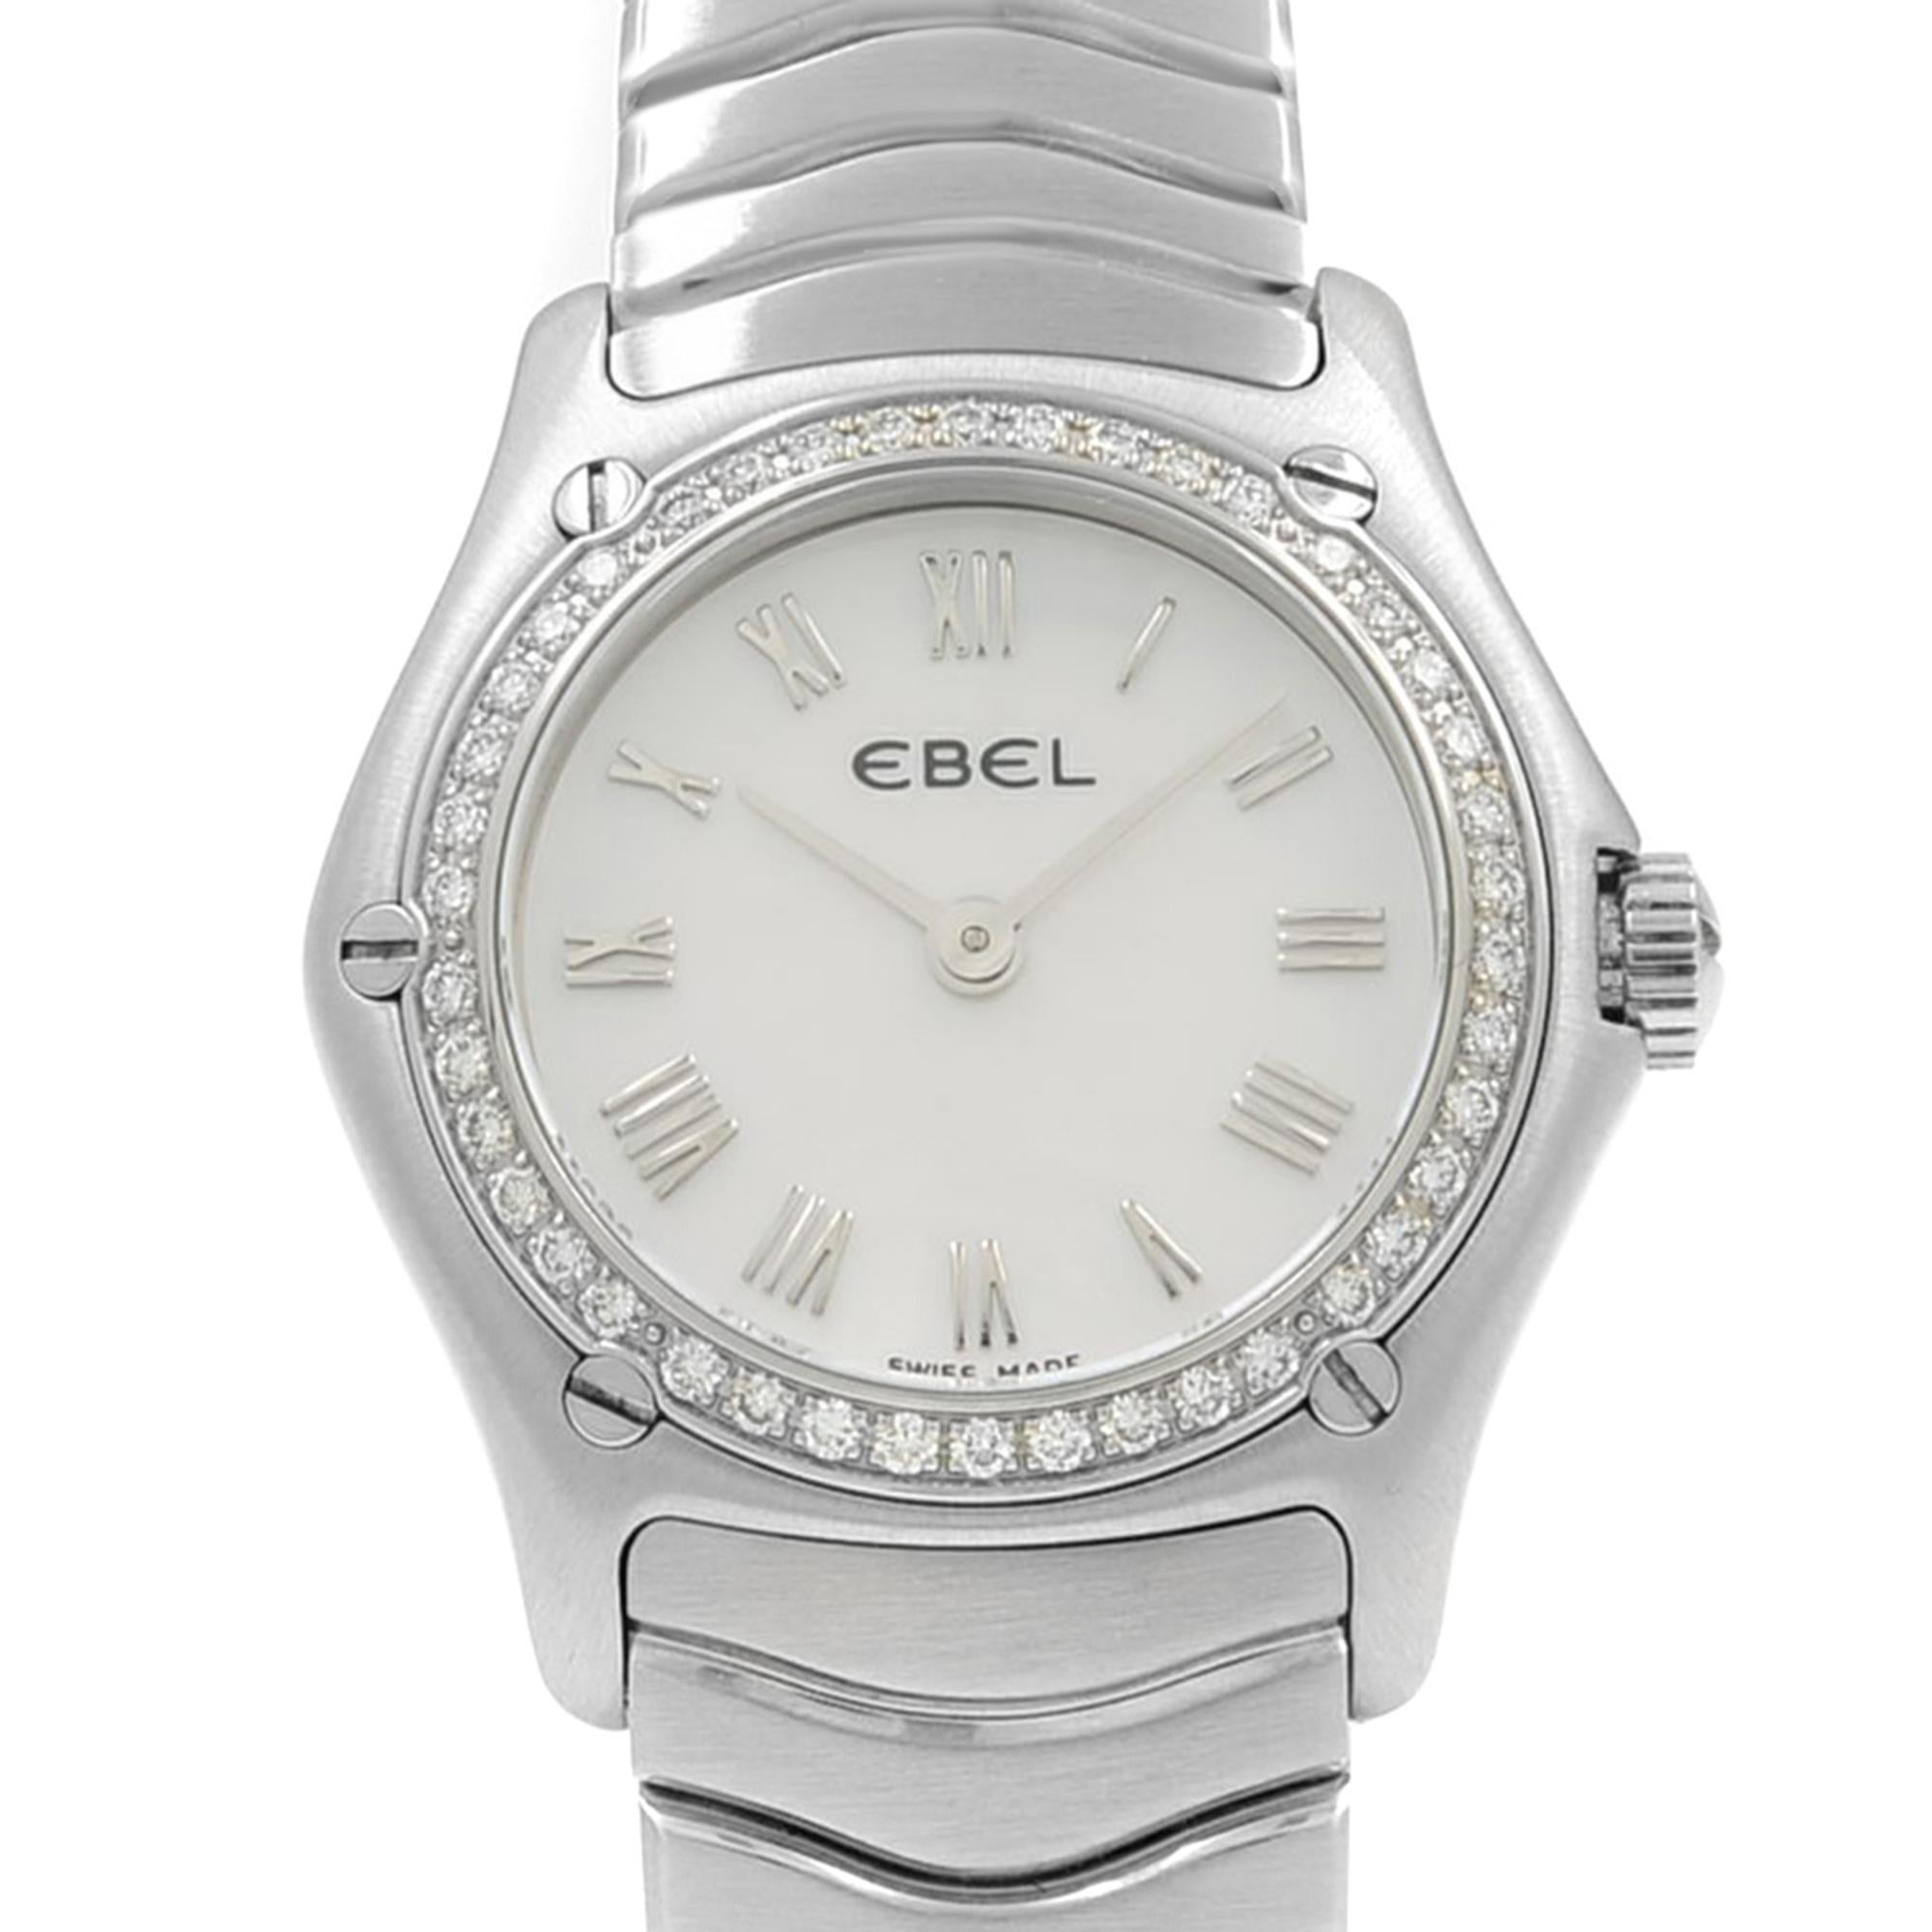 This display model Ebel Classic  9157F14-9225 is a beautiful Ladies timepiece that is powered by a quartz movement which is cased in a stainless steel case. It has a round shape face, diamonds dial and has hand roman numerals style markers. It is